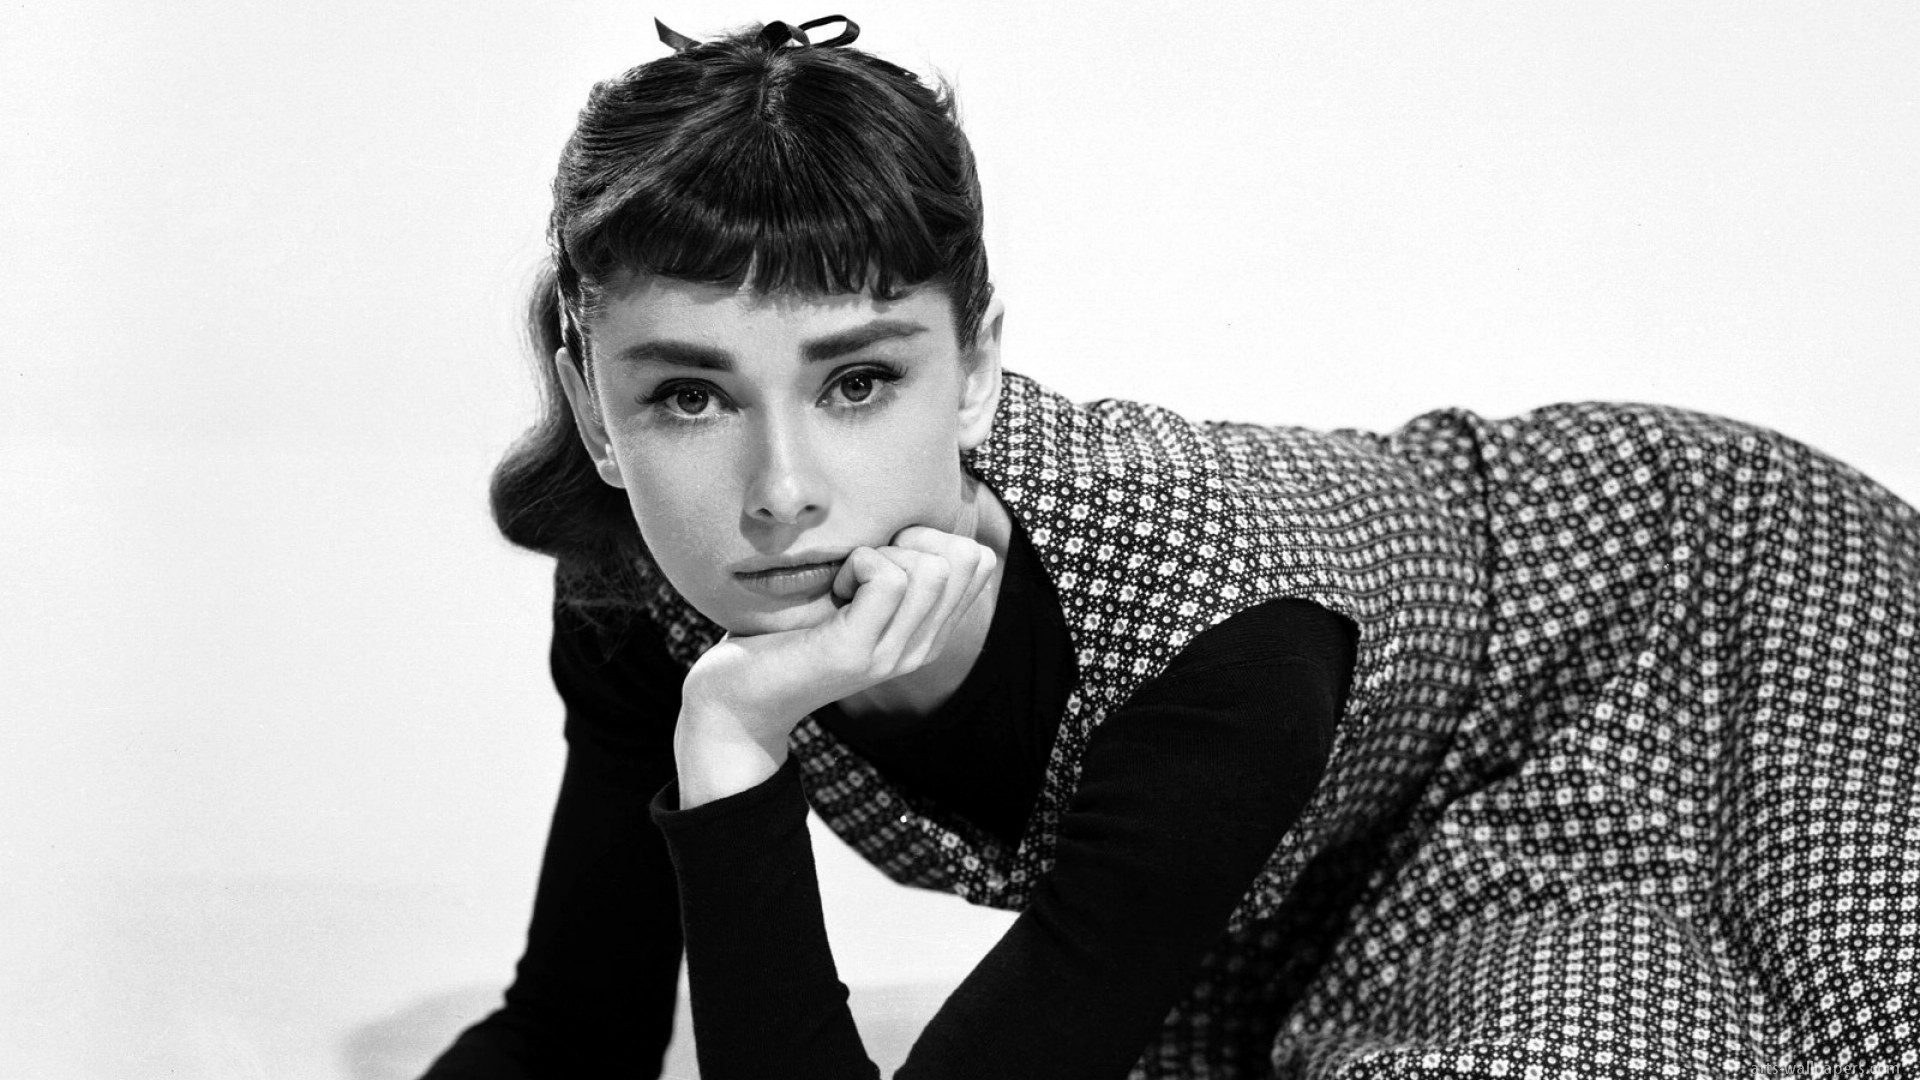 9 Gifs Of Audrey Hepburn That Will Make You Want To Become More Glamorous